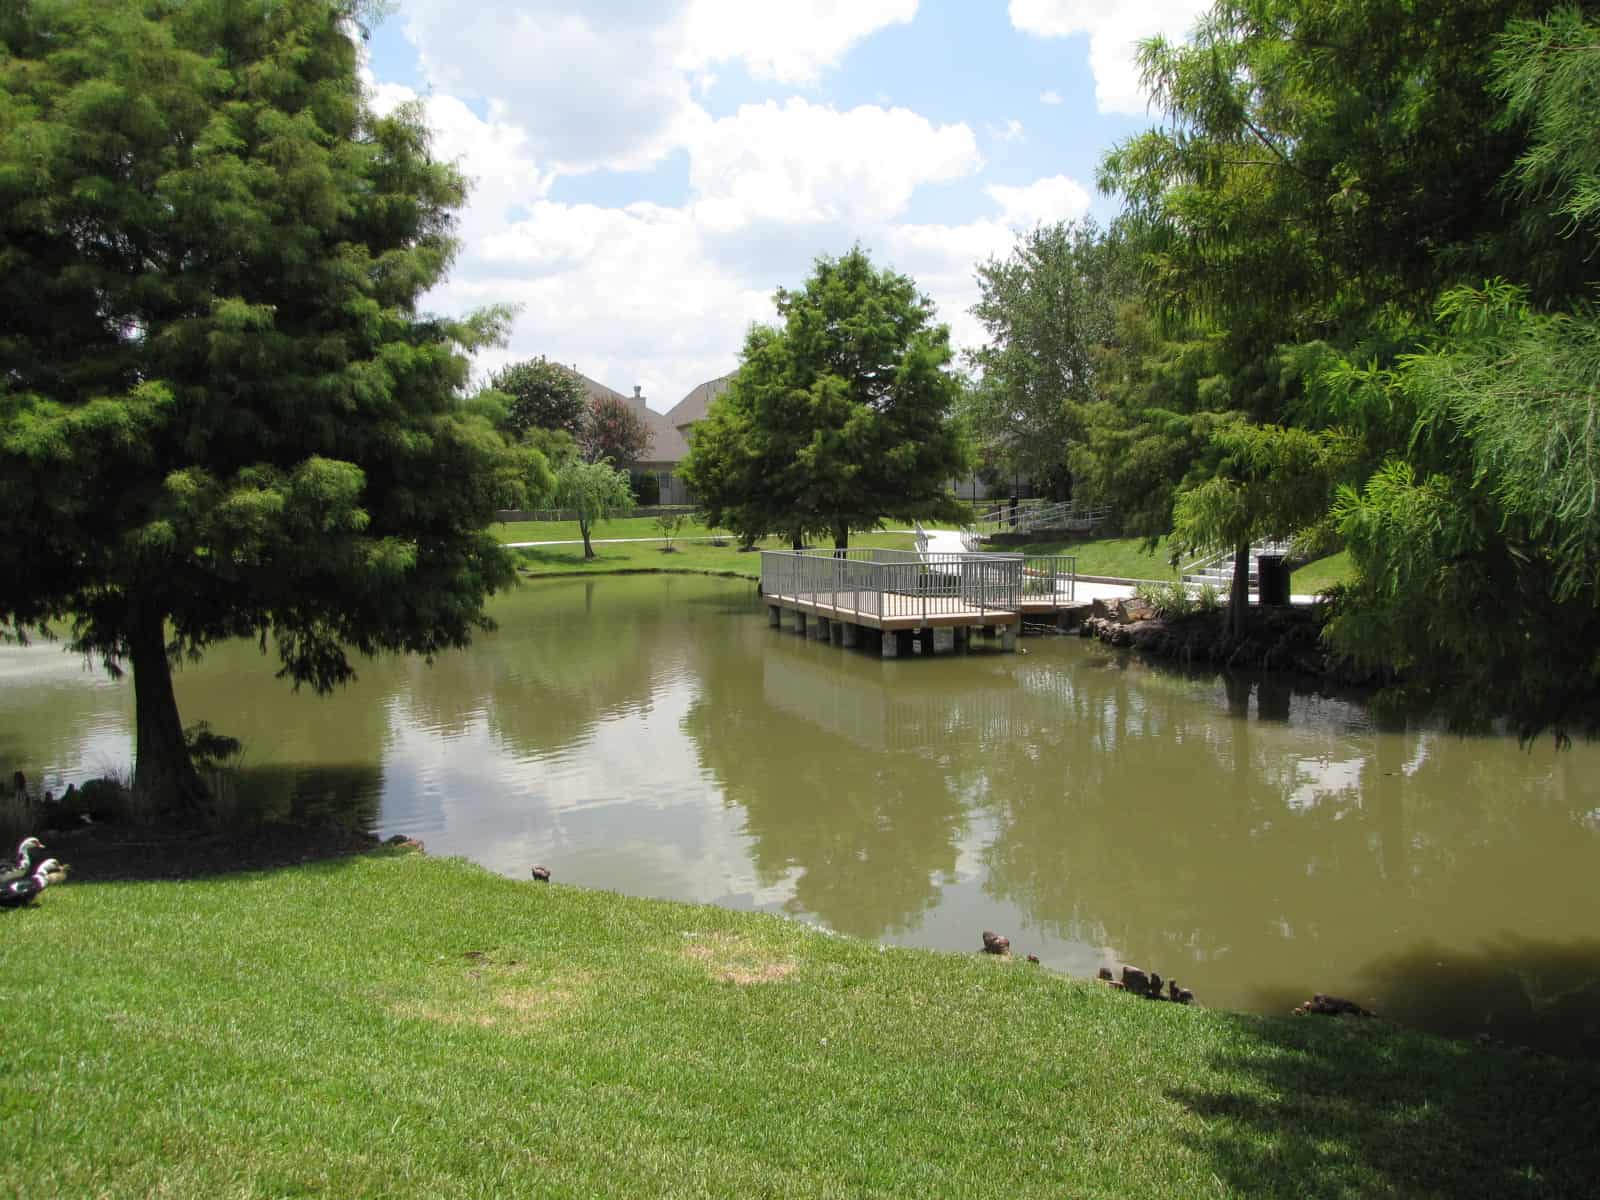 Fishing Pier on Pond at Waller Park